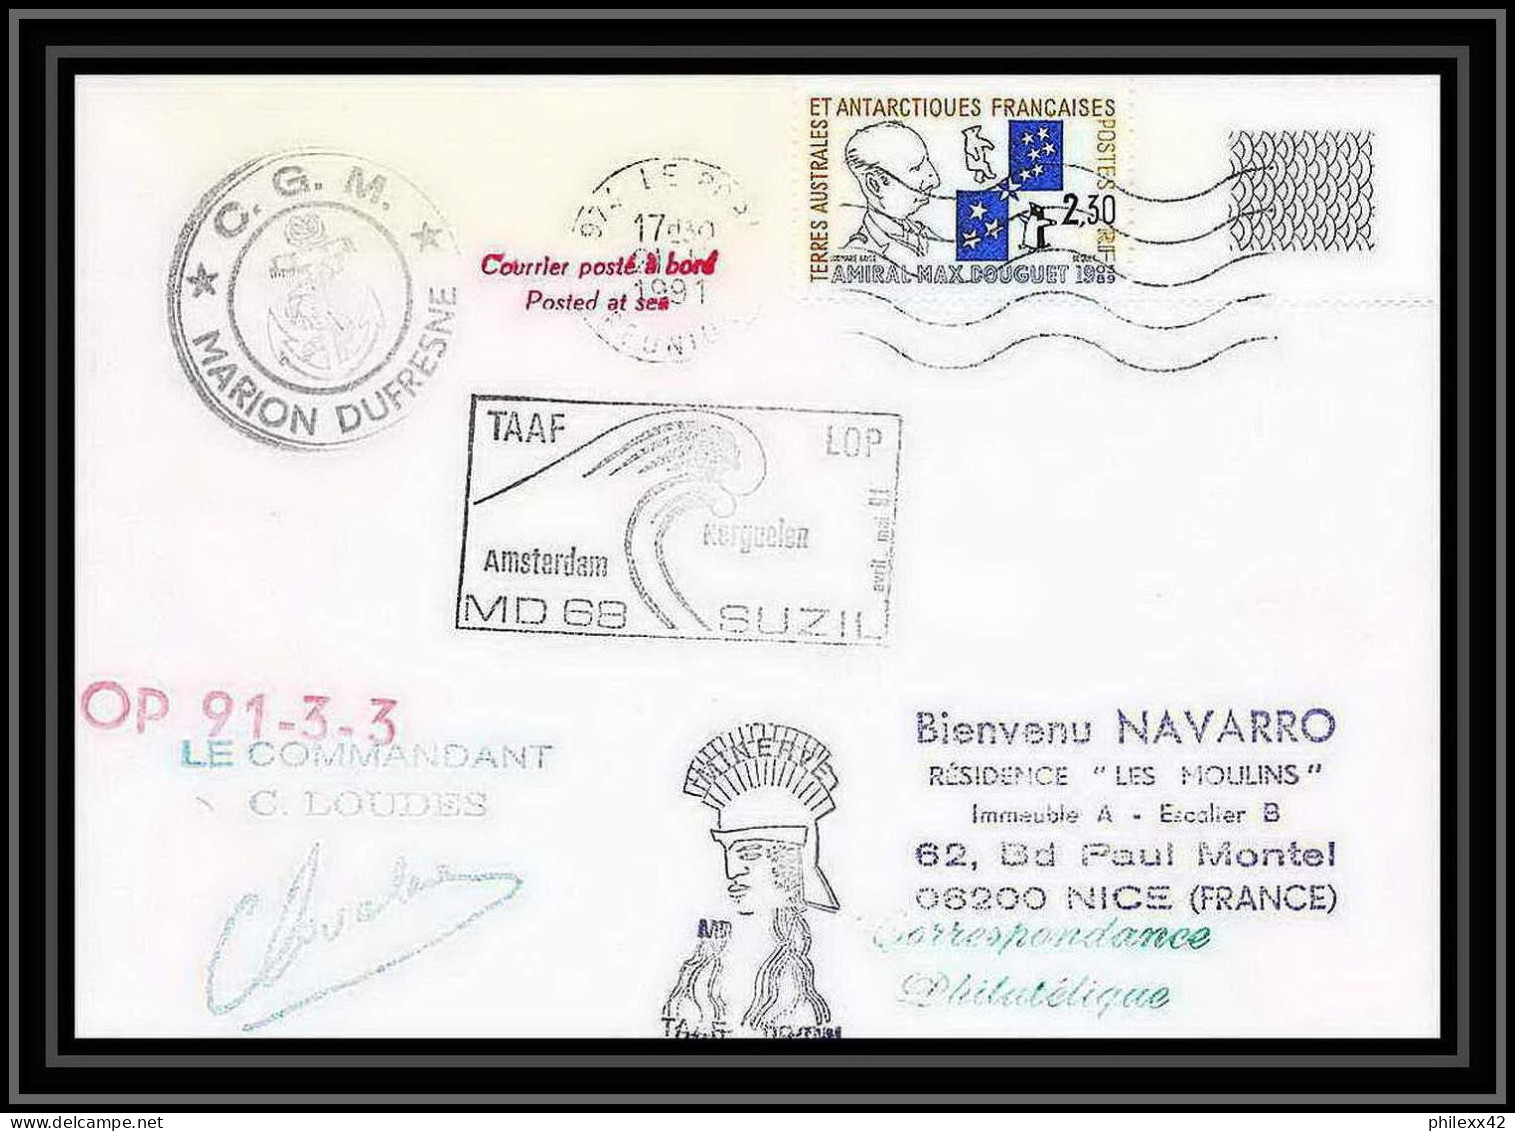 1763 Md 68 Op 91-3-3 Suzil Signé Signed Loudes Marion Dufresne 21/5/1991 TAAF Antarctic Terres Australes Lettre (cover) - Antarctic Expeditions